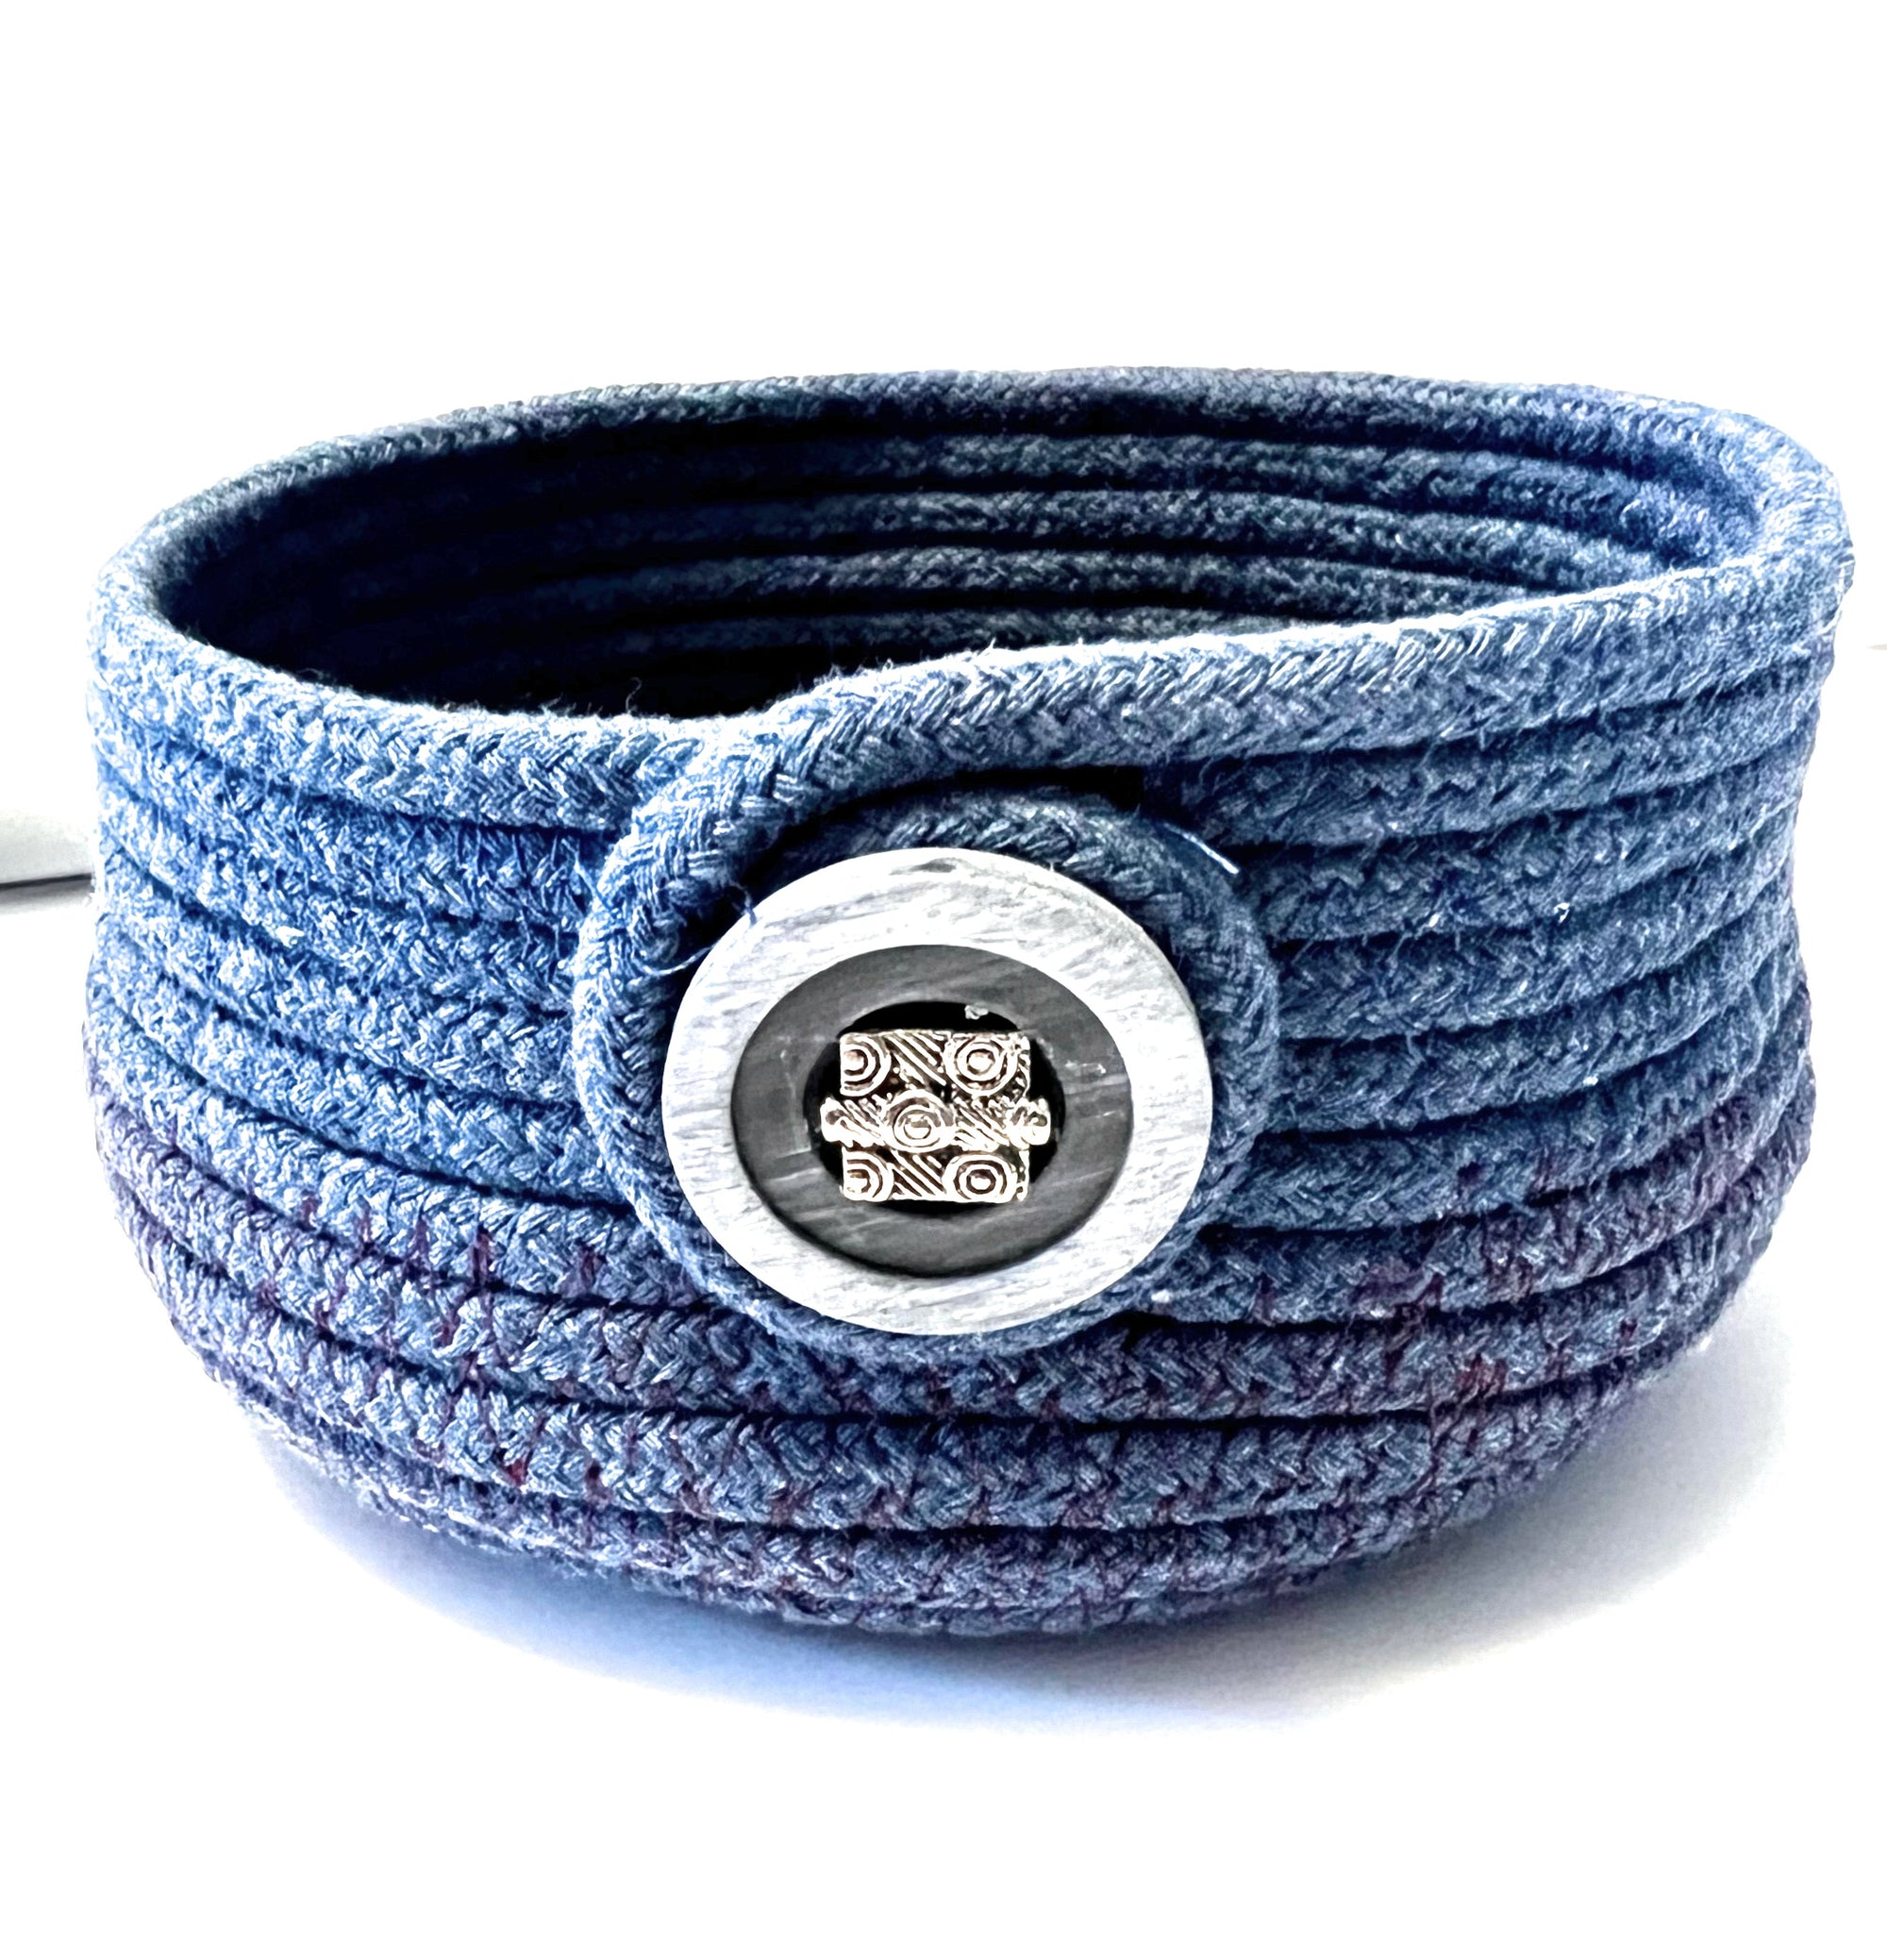 Coiled Rope Bowl in Blue with Silver Bead Accent